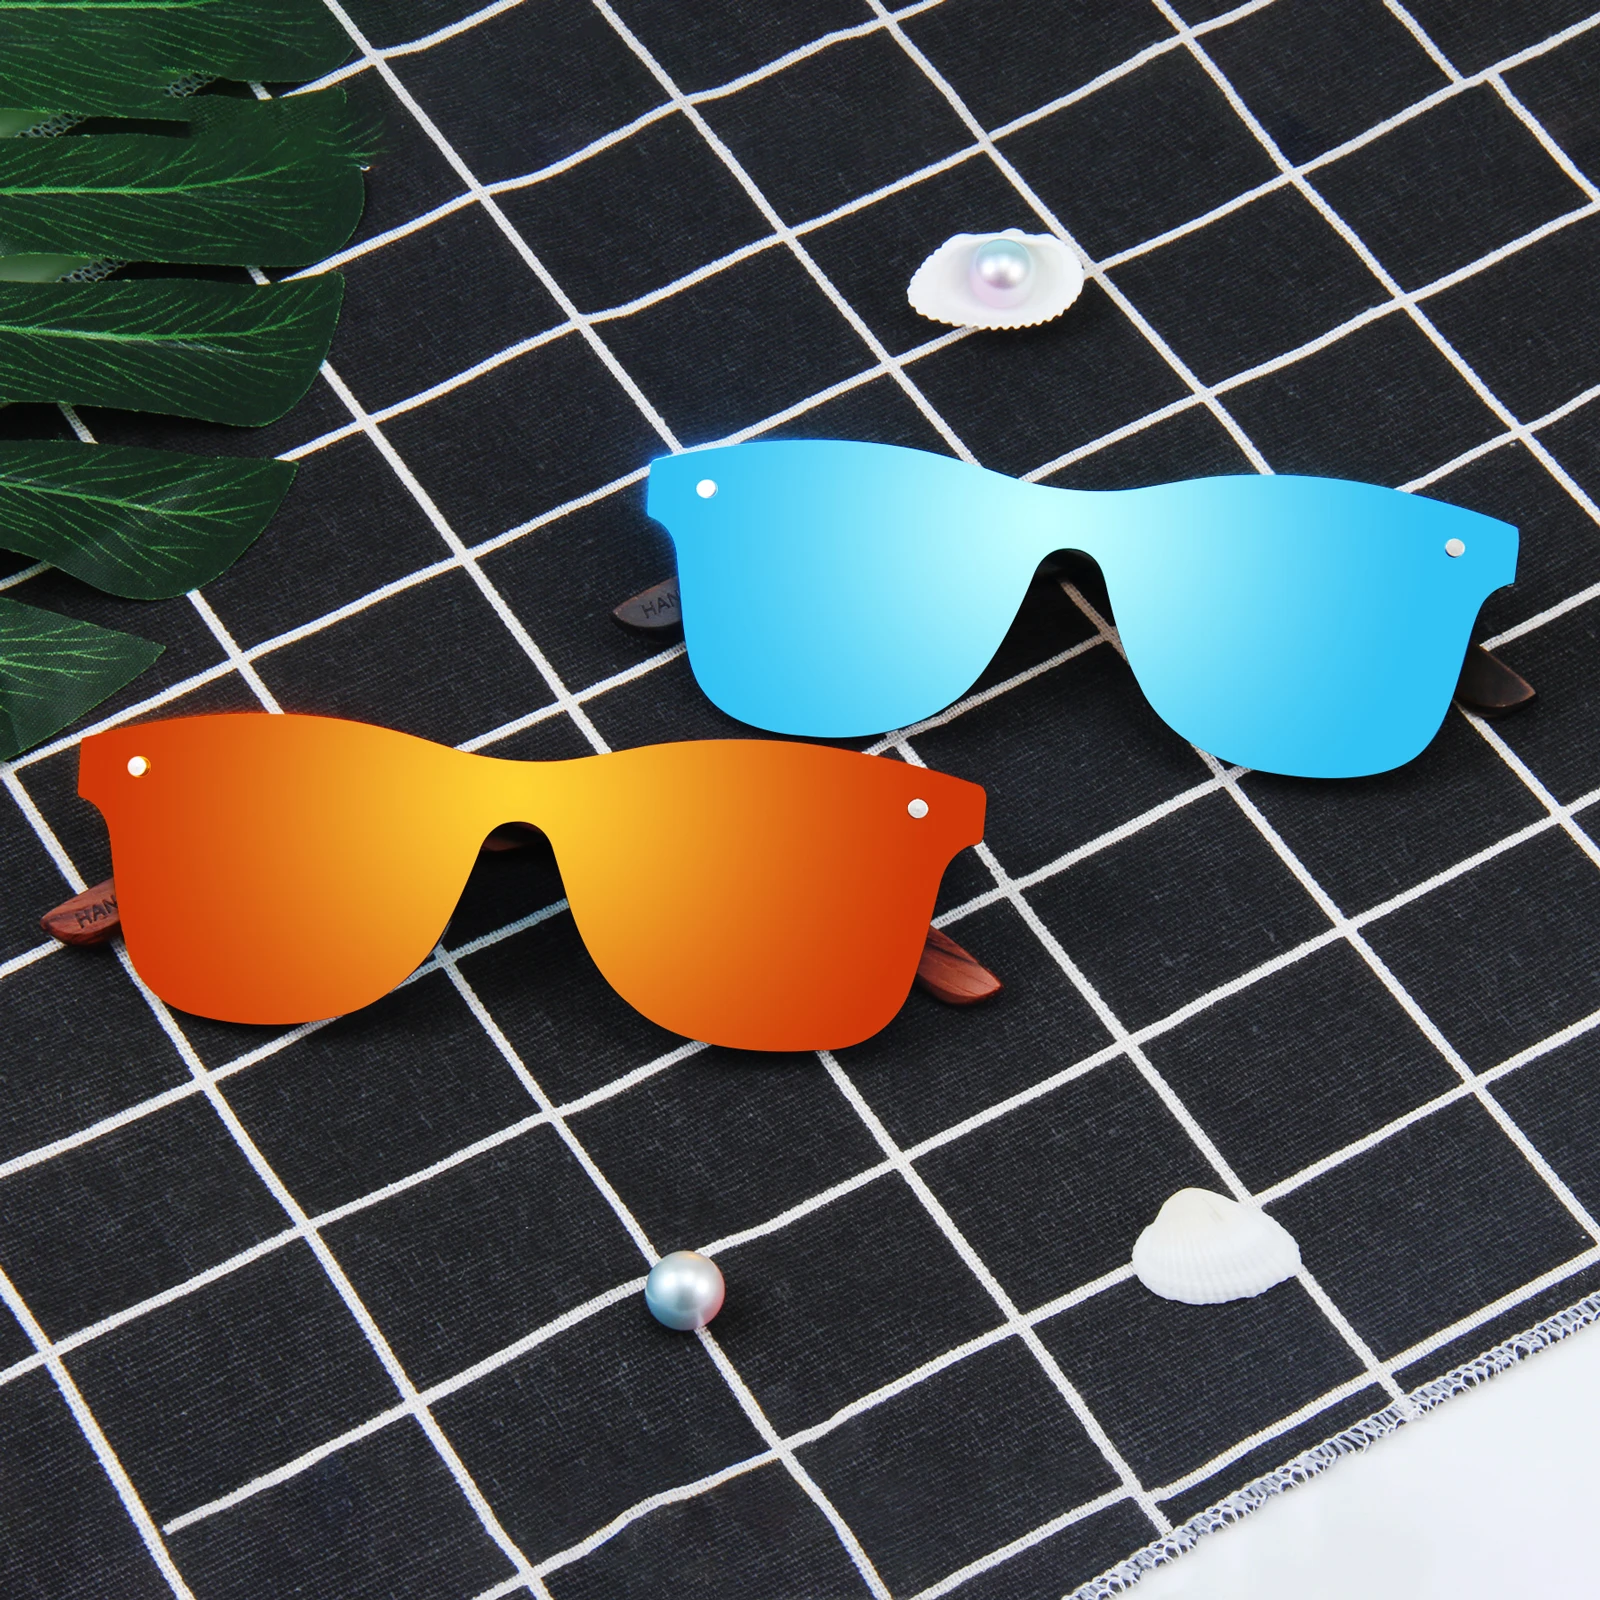 

New arrivals spring hinges wooden eyewear polarized sunglasses mirrormirrored sun glasses, Silver mirror lens